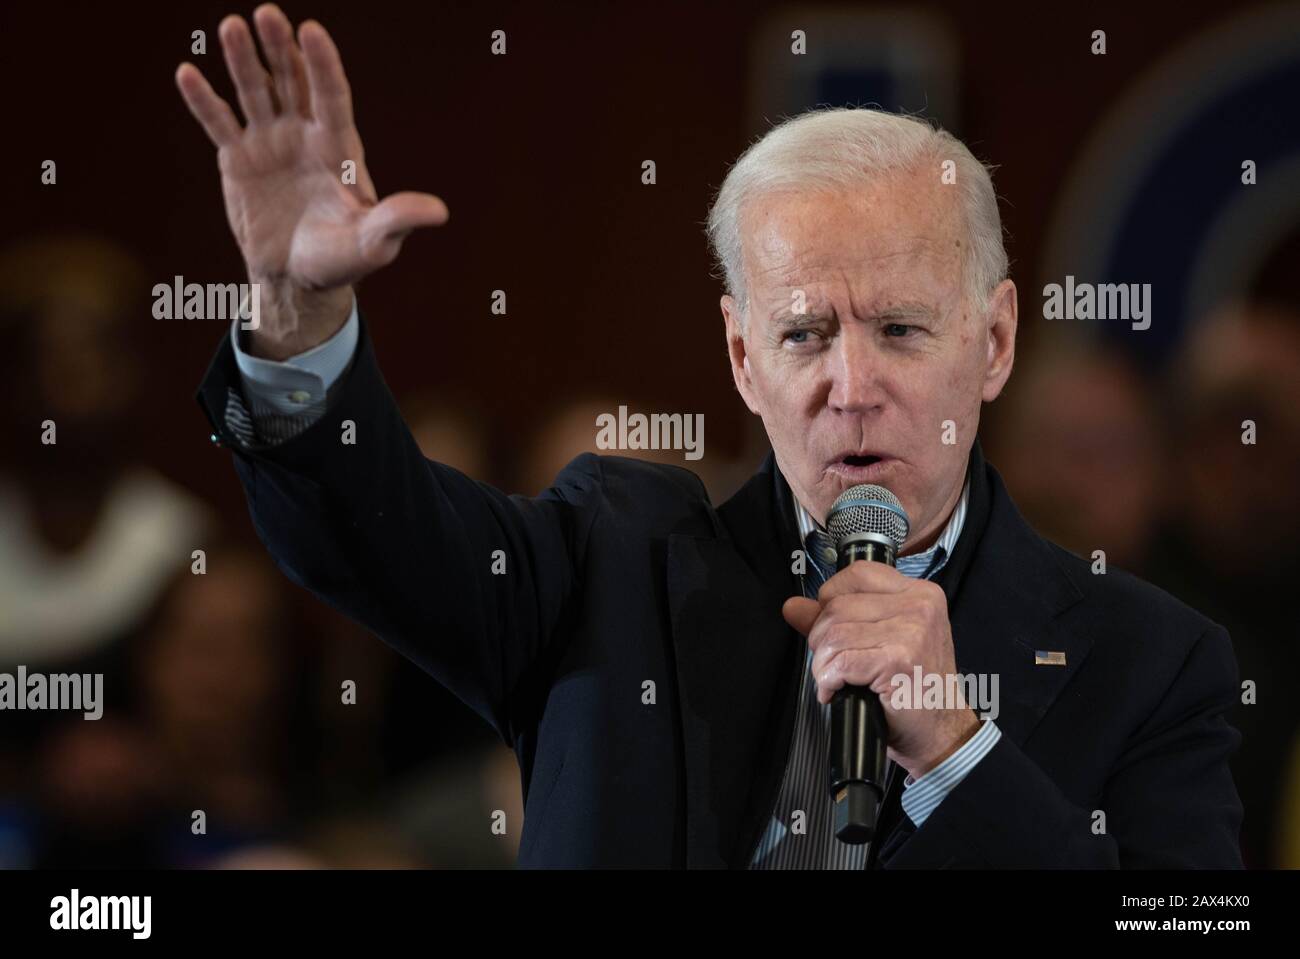 Former U.S. Vice President Joe Biden campaigns in Hampton, N.H., USA, on Feb. 9, 2020, during the New Hampshire presidential primary. Stock Photo